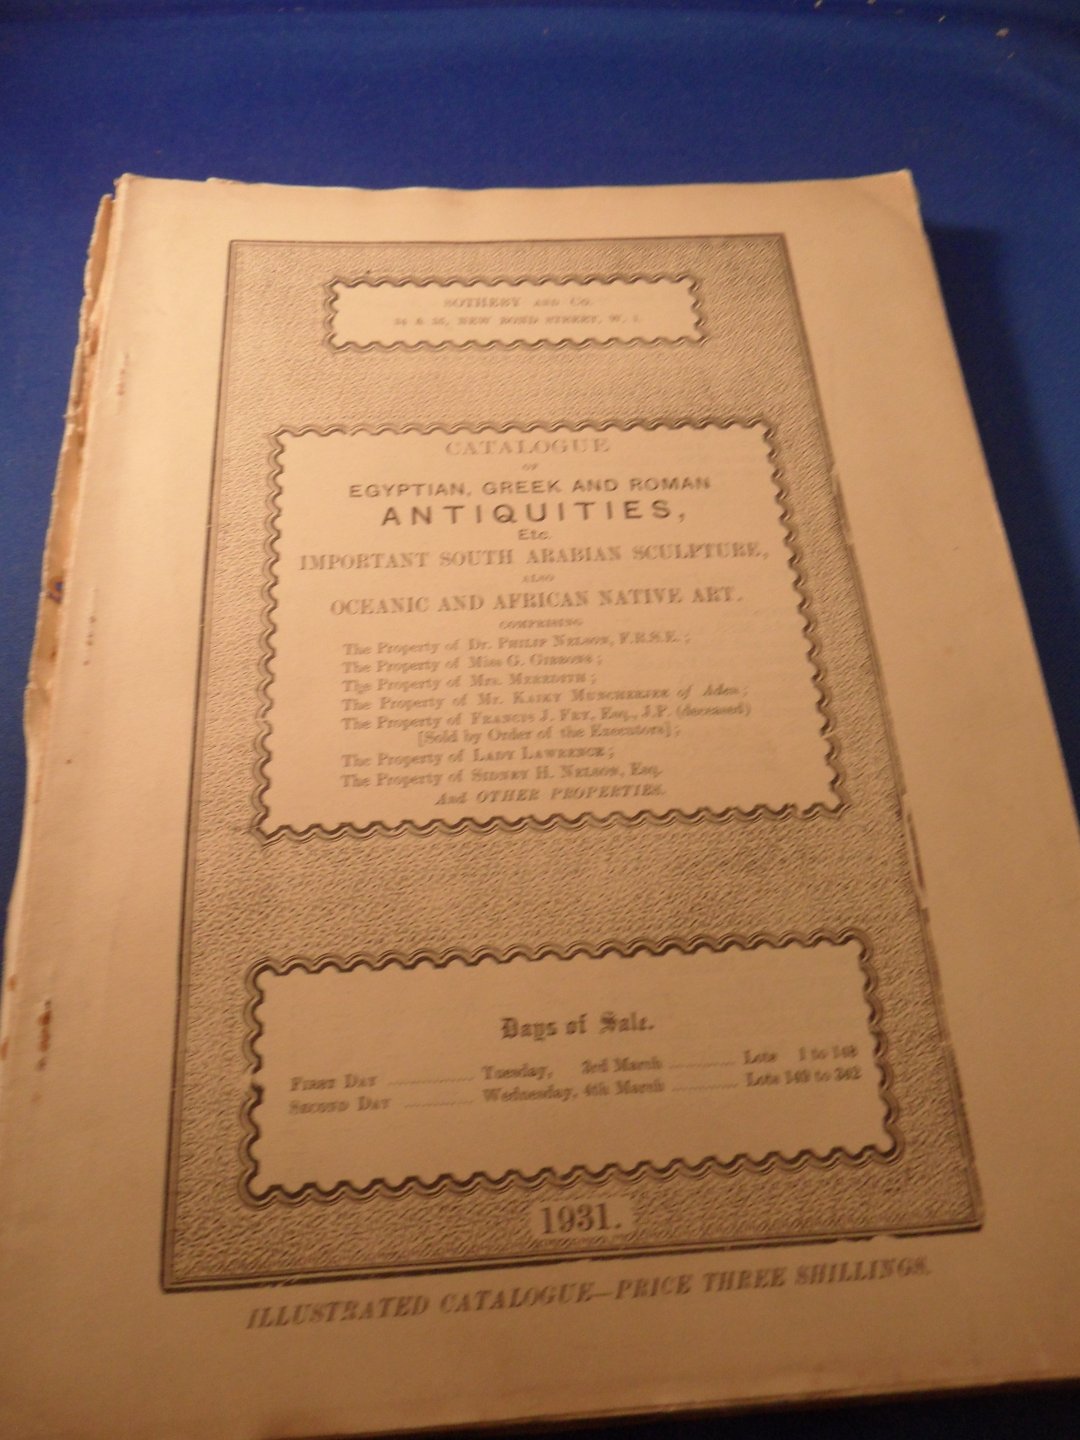 Sotheby & Co - Catalogue of Egyptian, Greek and Roman Antiquities